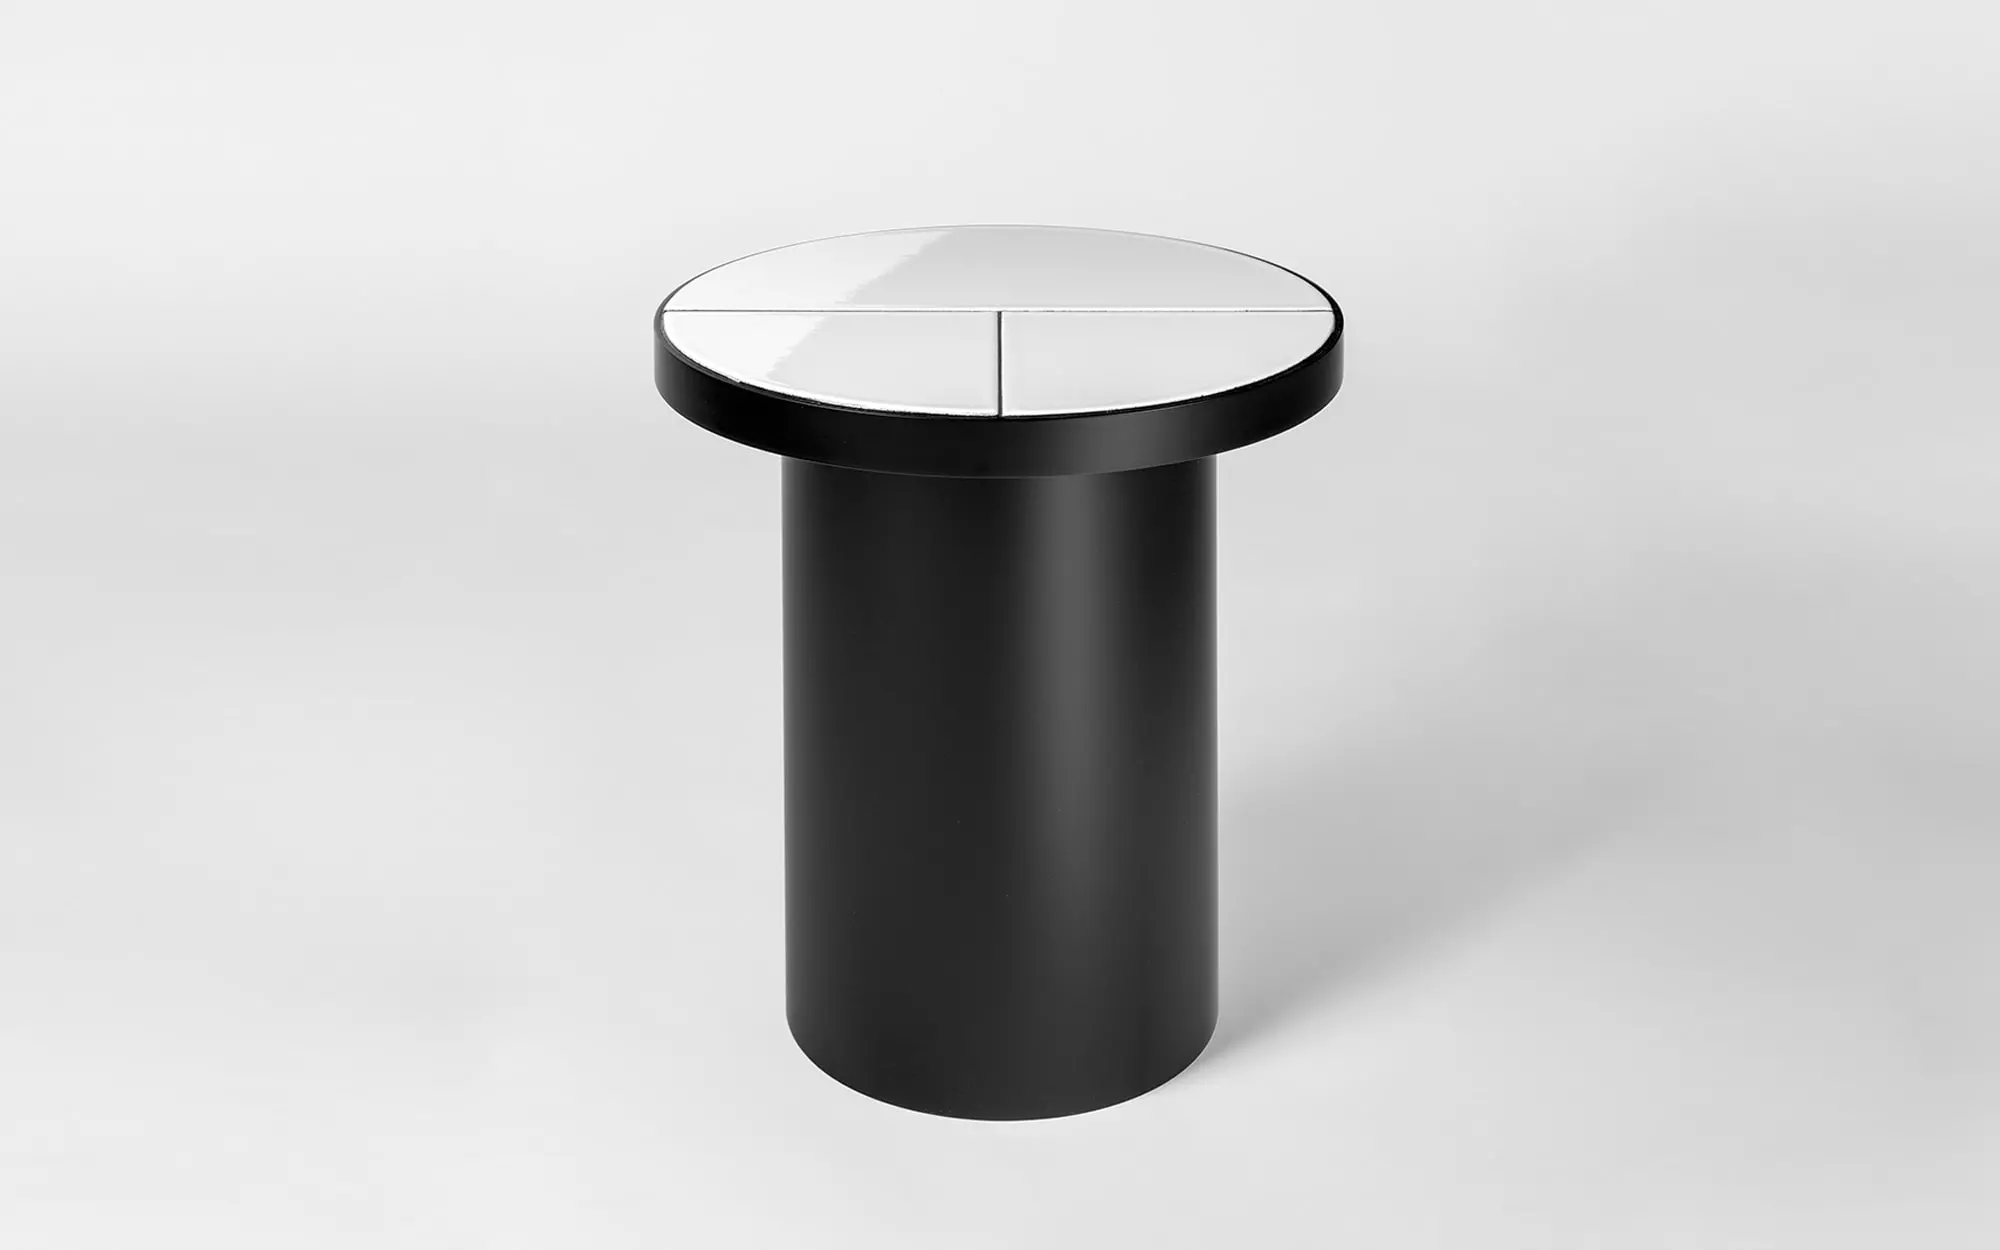 Fraction - monochromatic Side Table - Pierre Charpin - Miscellaneous - Galerie kreo